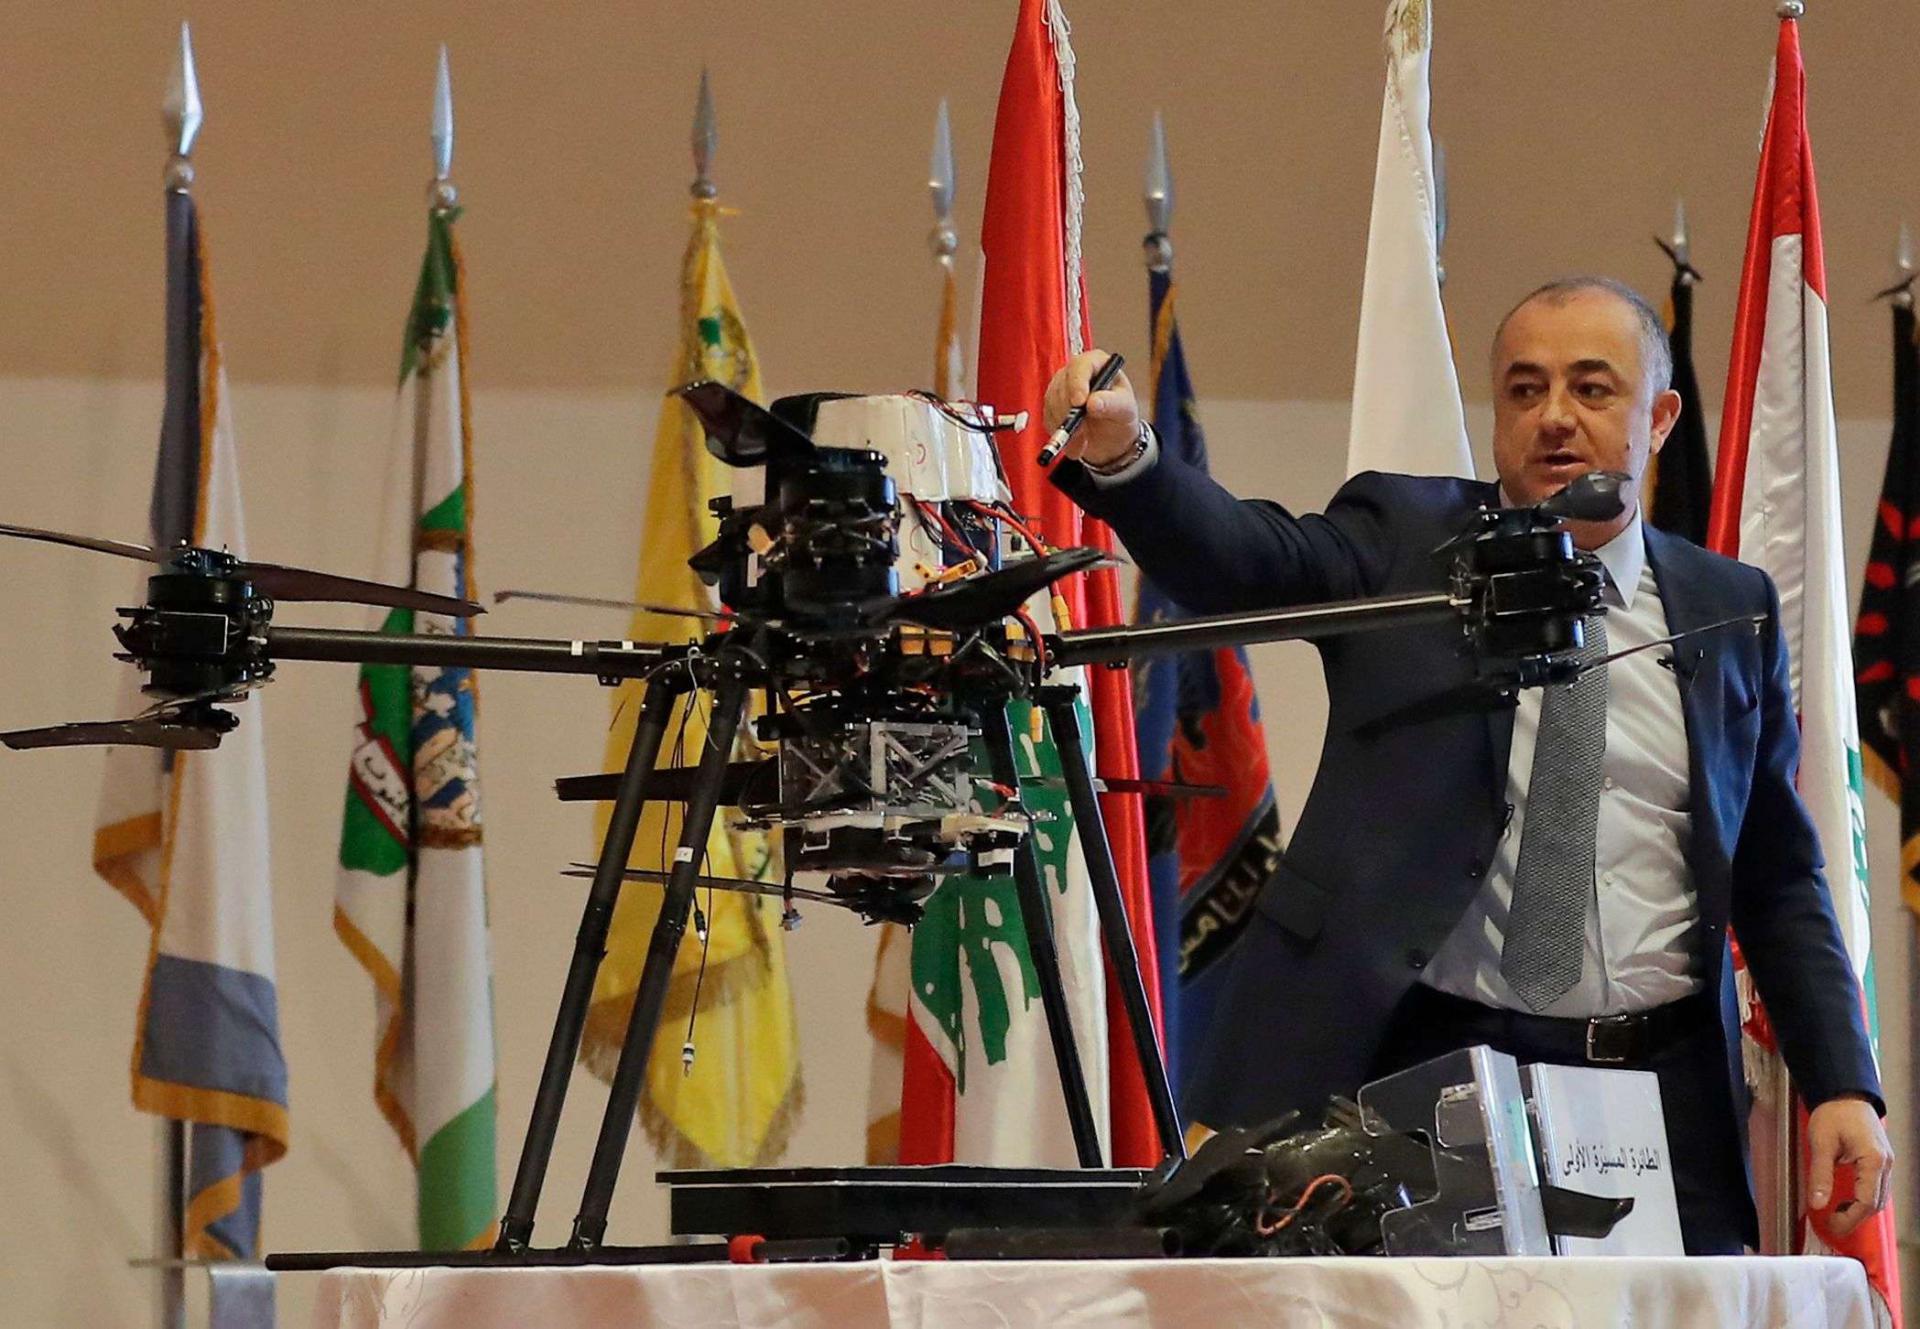 The August 25 drone incident in Beirut drastically raised tensions in the region